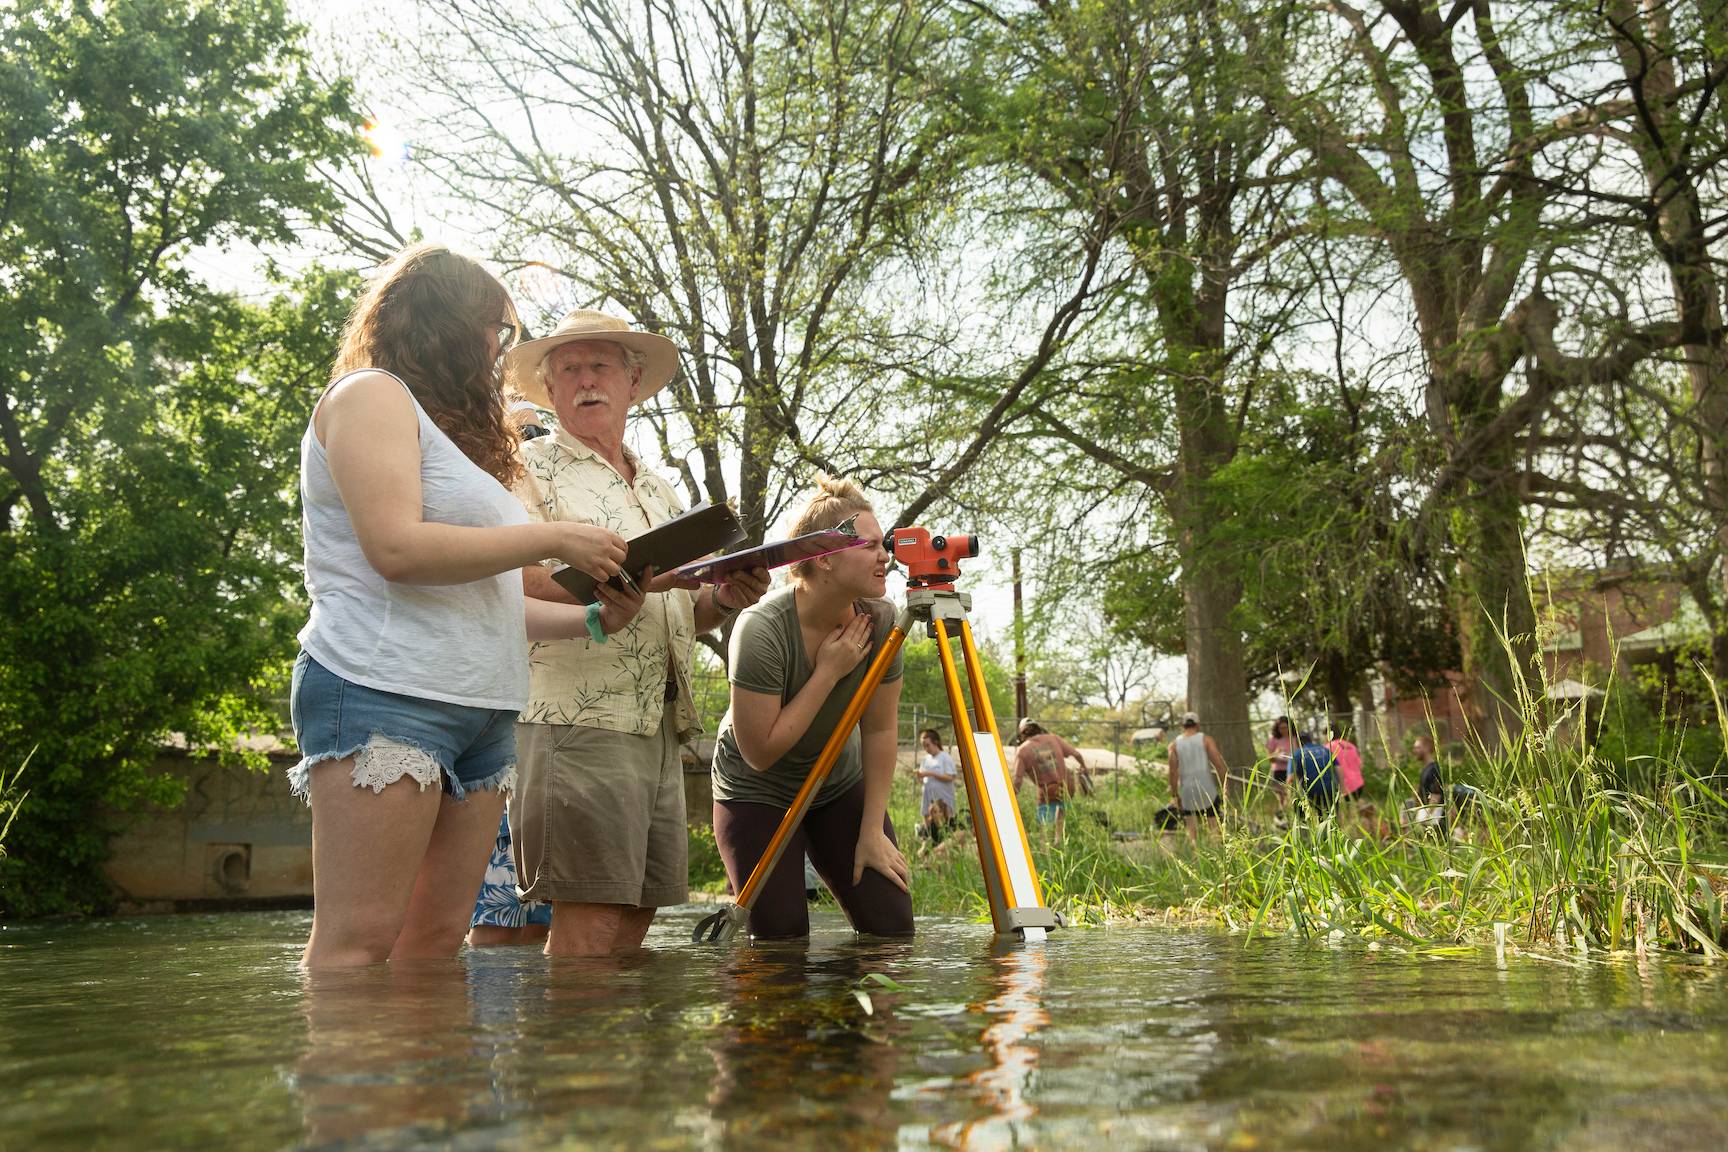 Students and faculty standing in knee high water doing a survey with a geographic tools